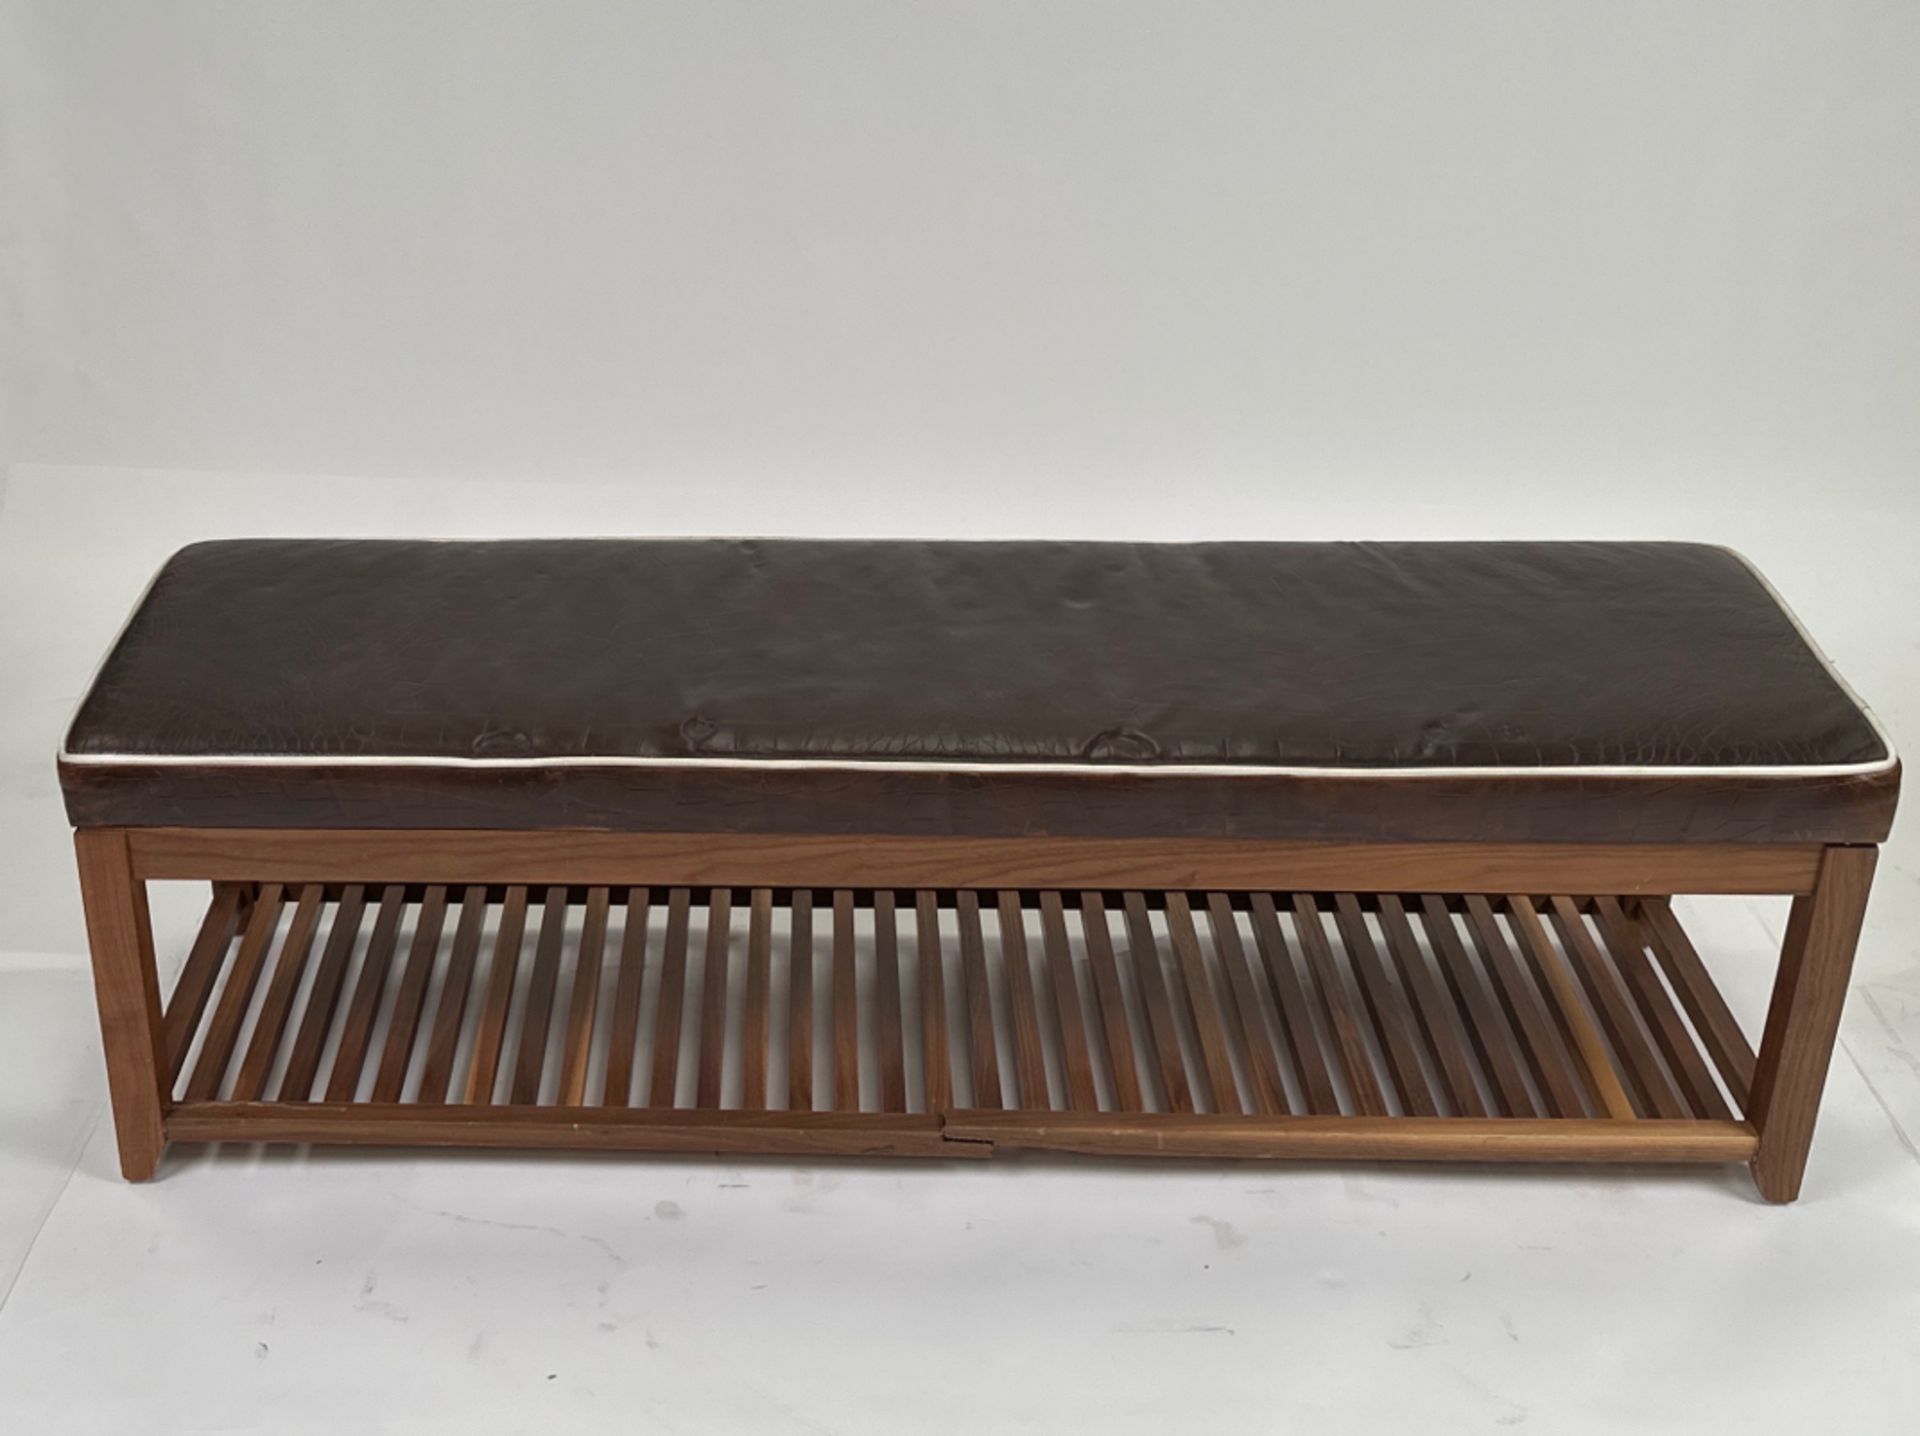 Wood & Faux Leather Bench - Image 2 of 5